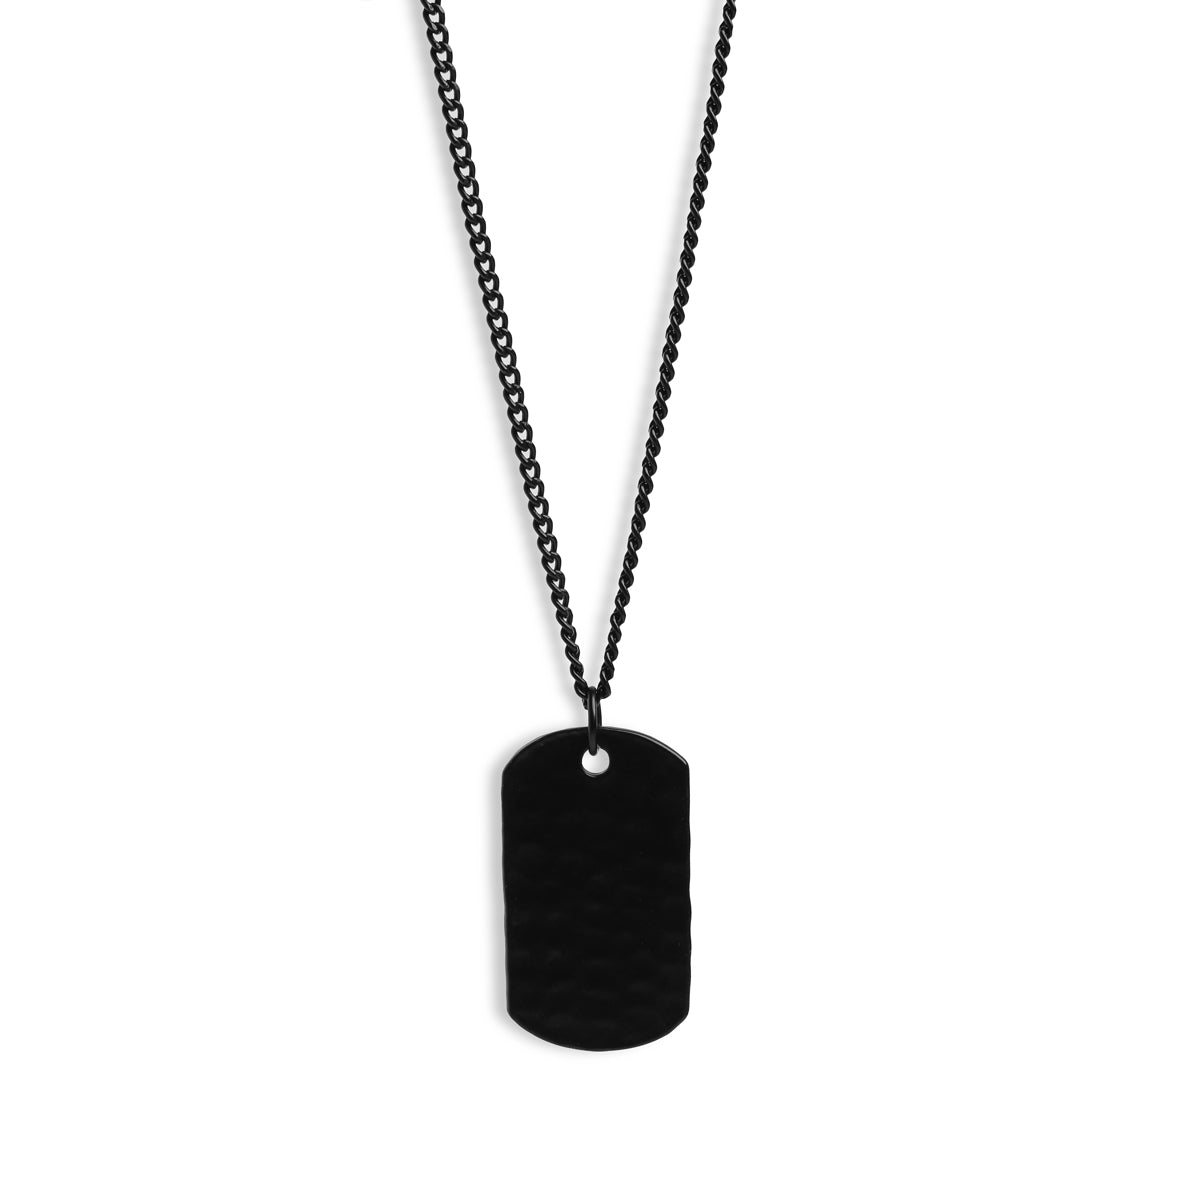 Cosmic Crater Dog Tag Necklace